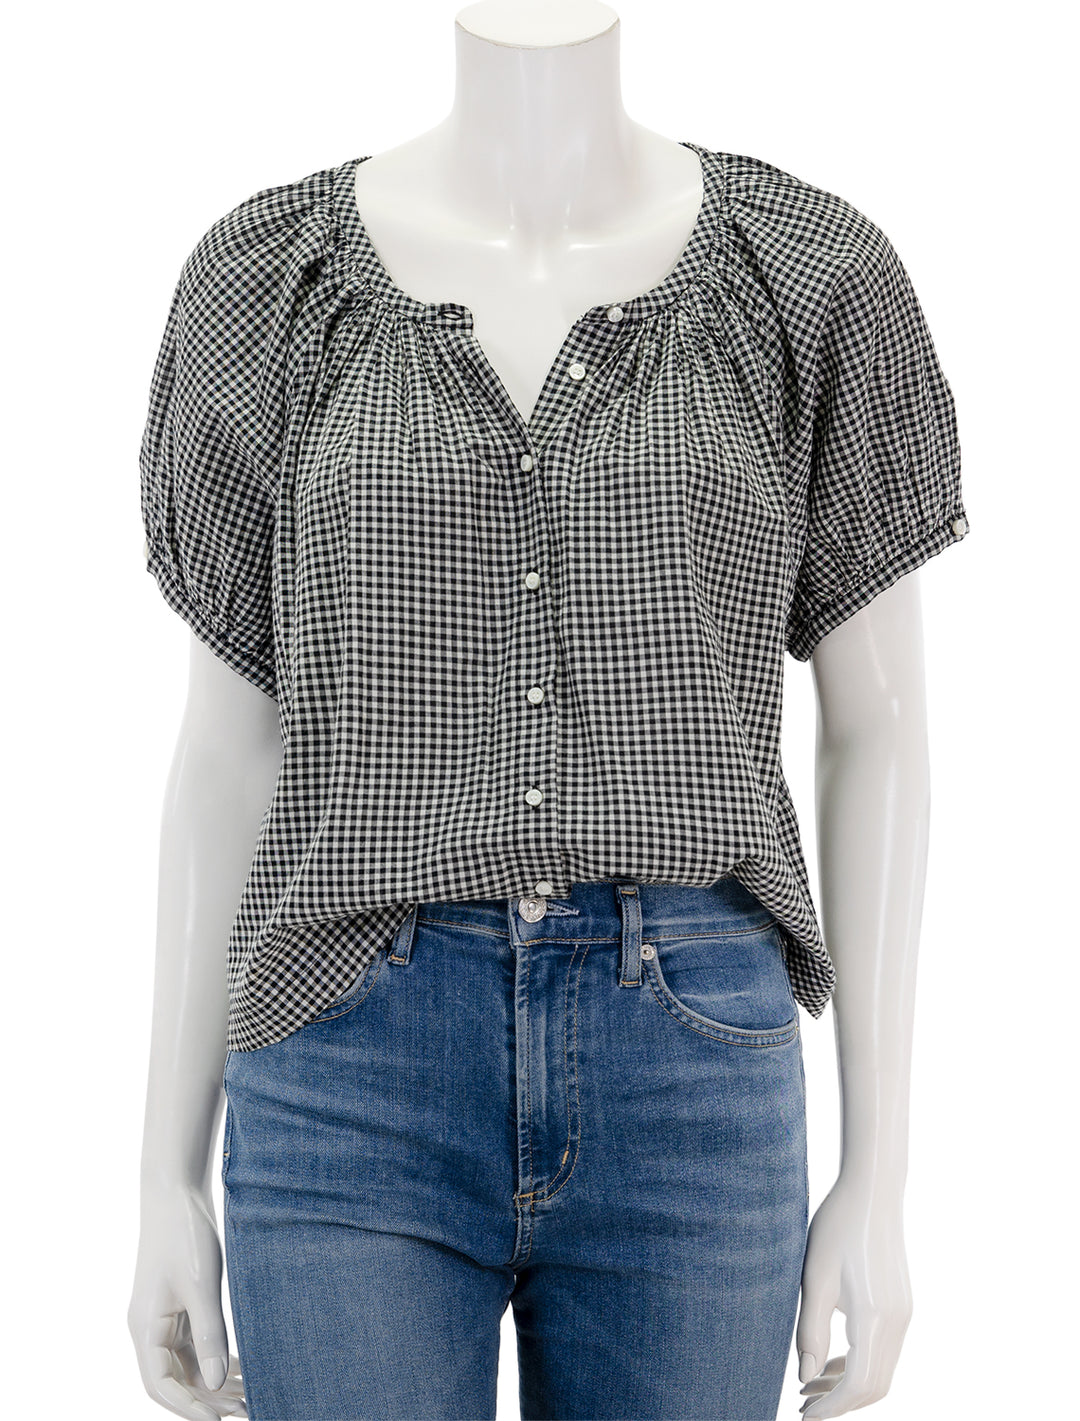 Front view of DOEN's june top in la maddalena gingham.